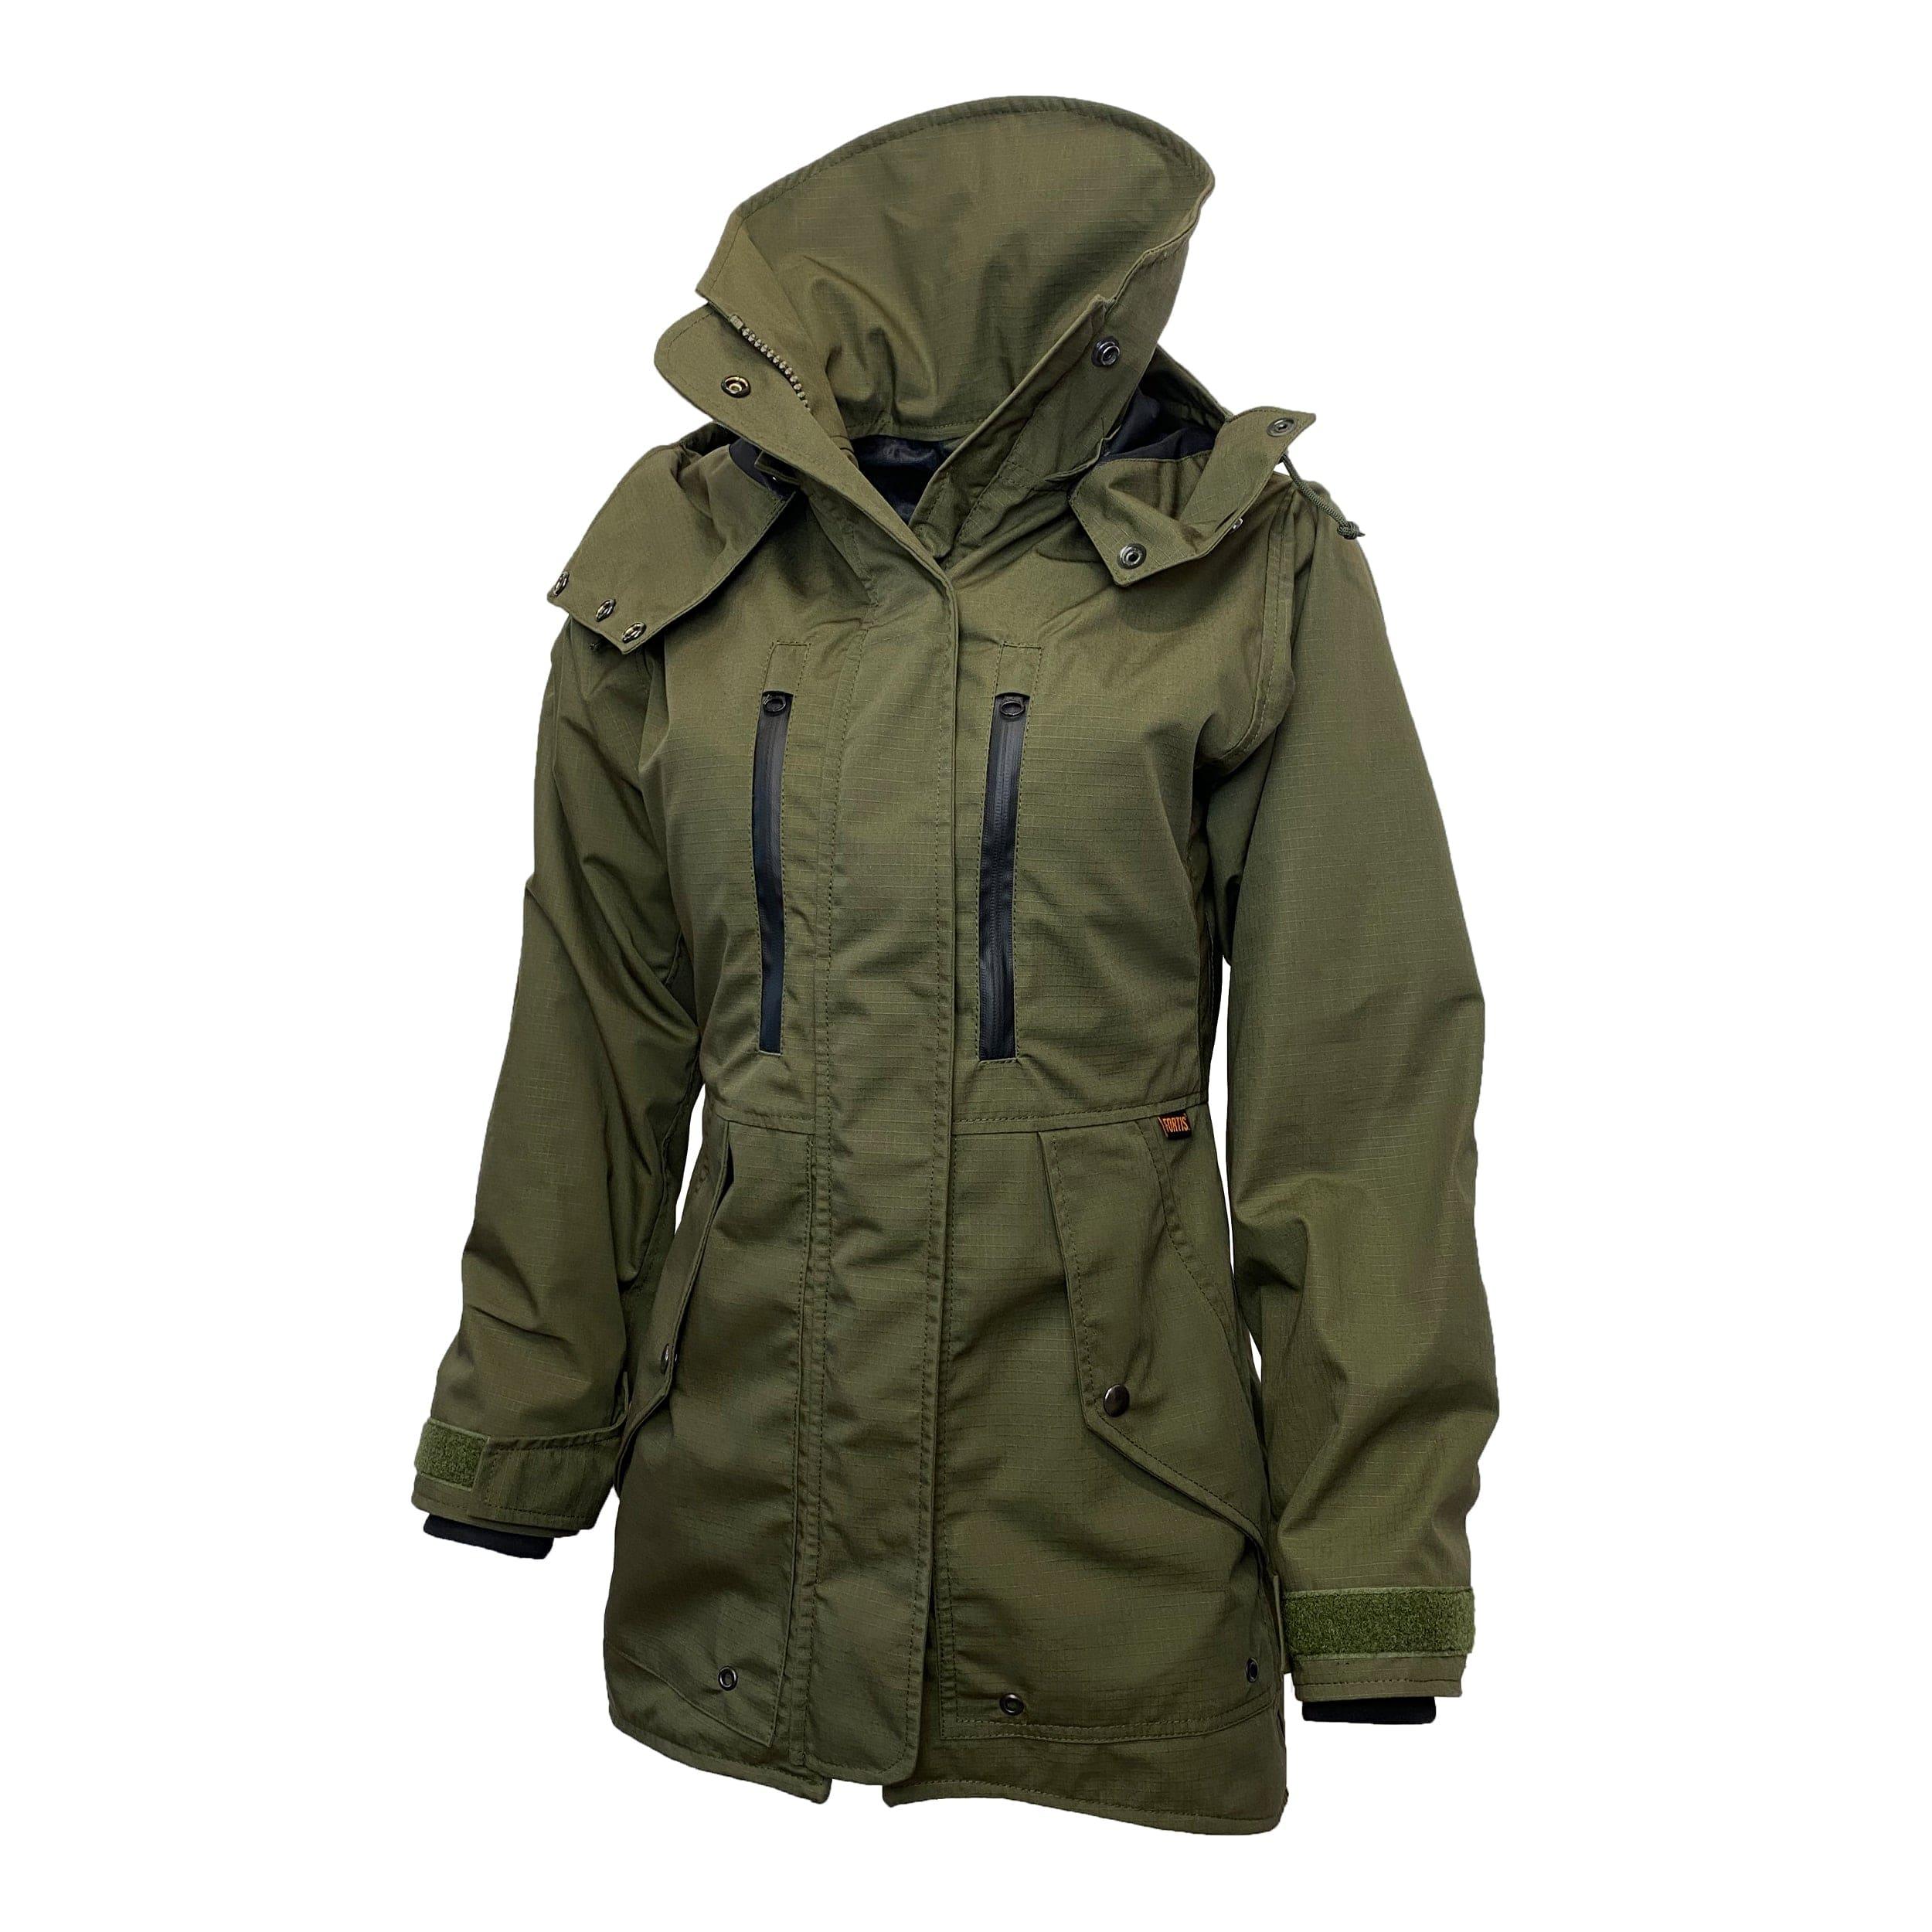 Fortis Technical Coats Fortis Ladies Field Jacket